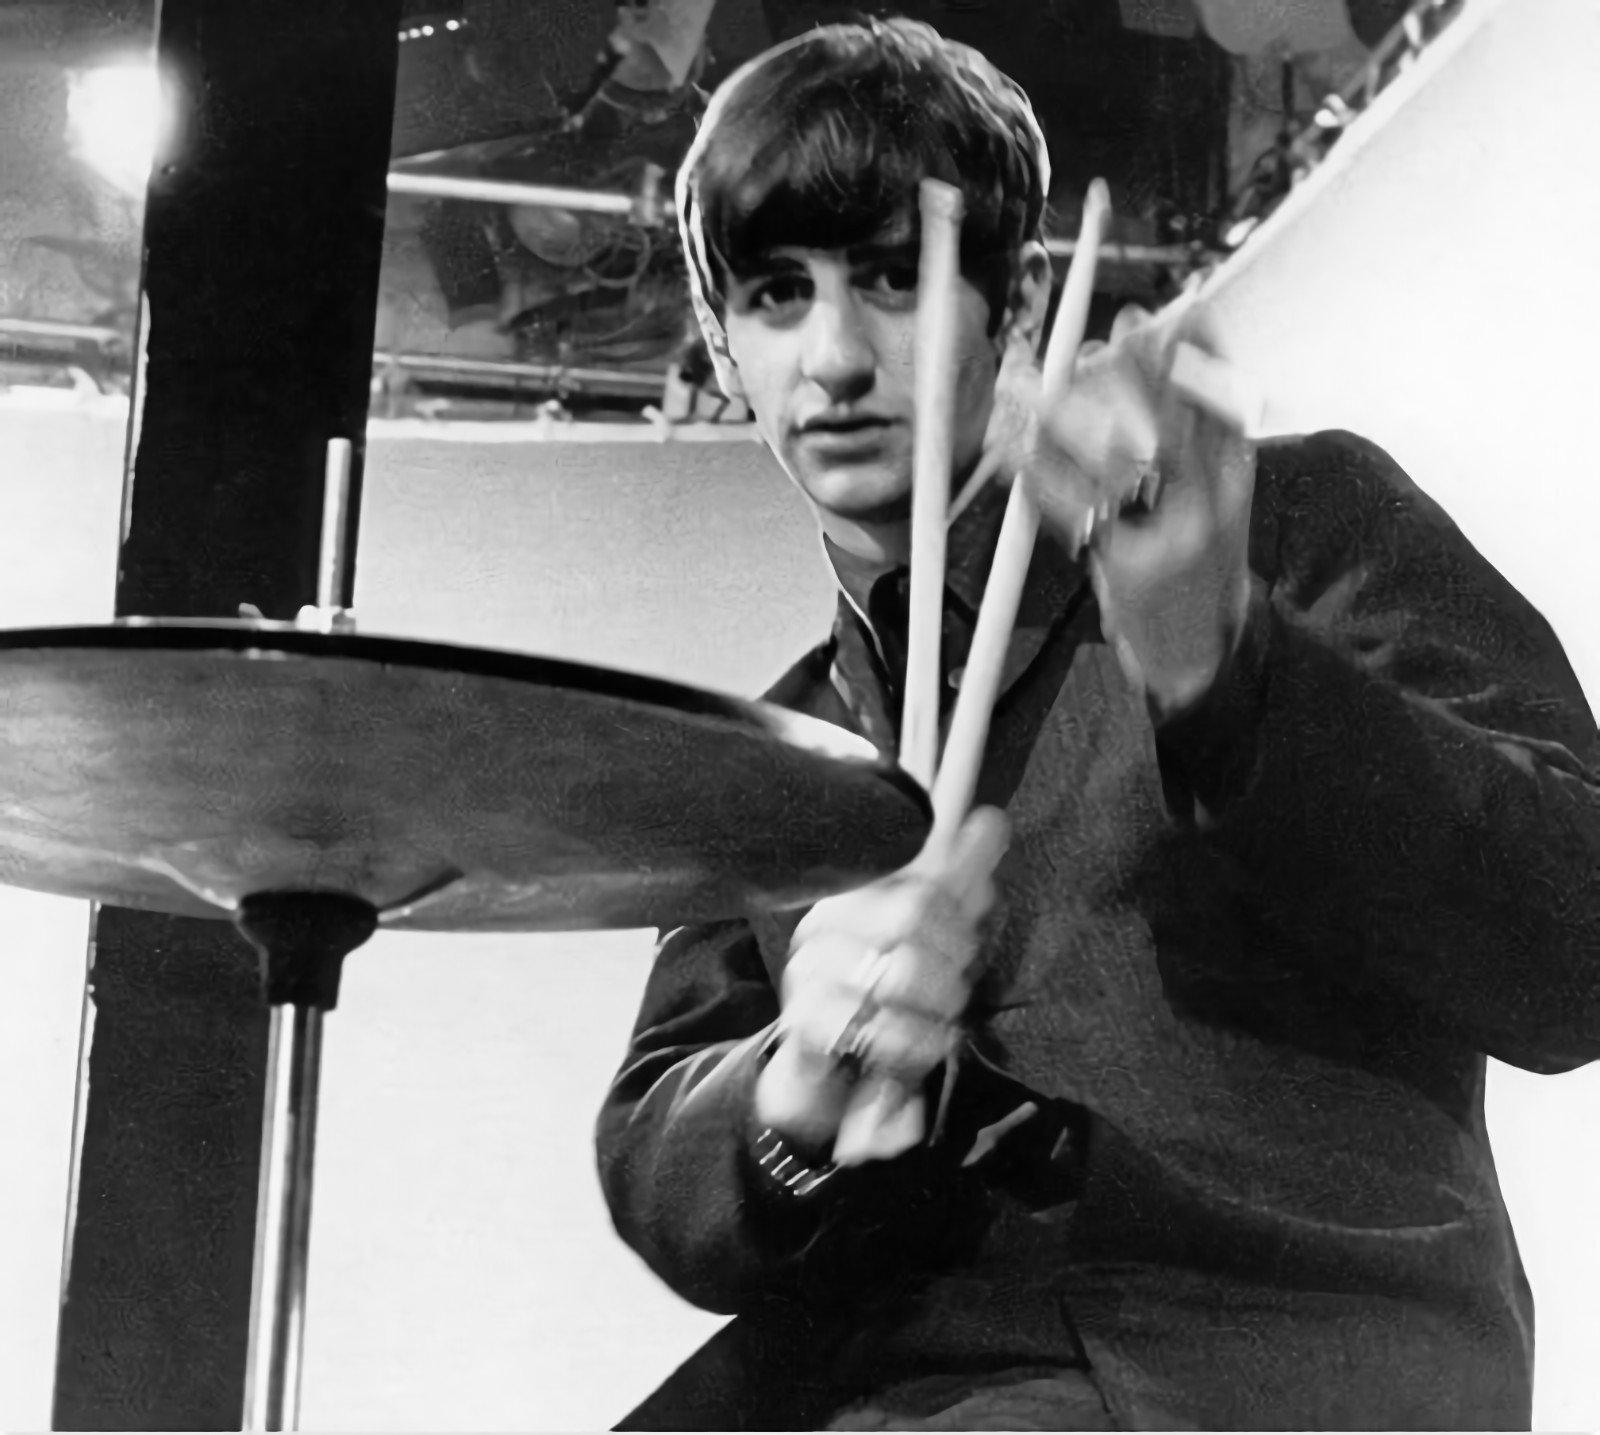 Ringo Starr Shares Beatles Stories, Never Before Seen Photo In New Book